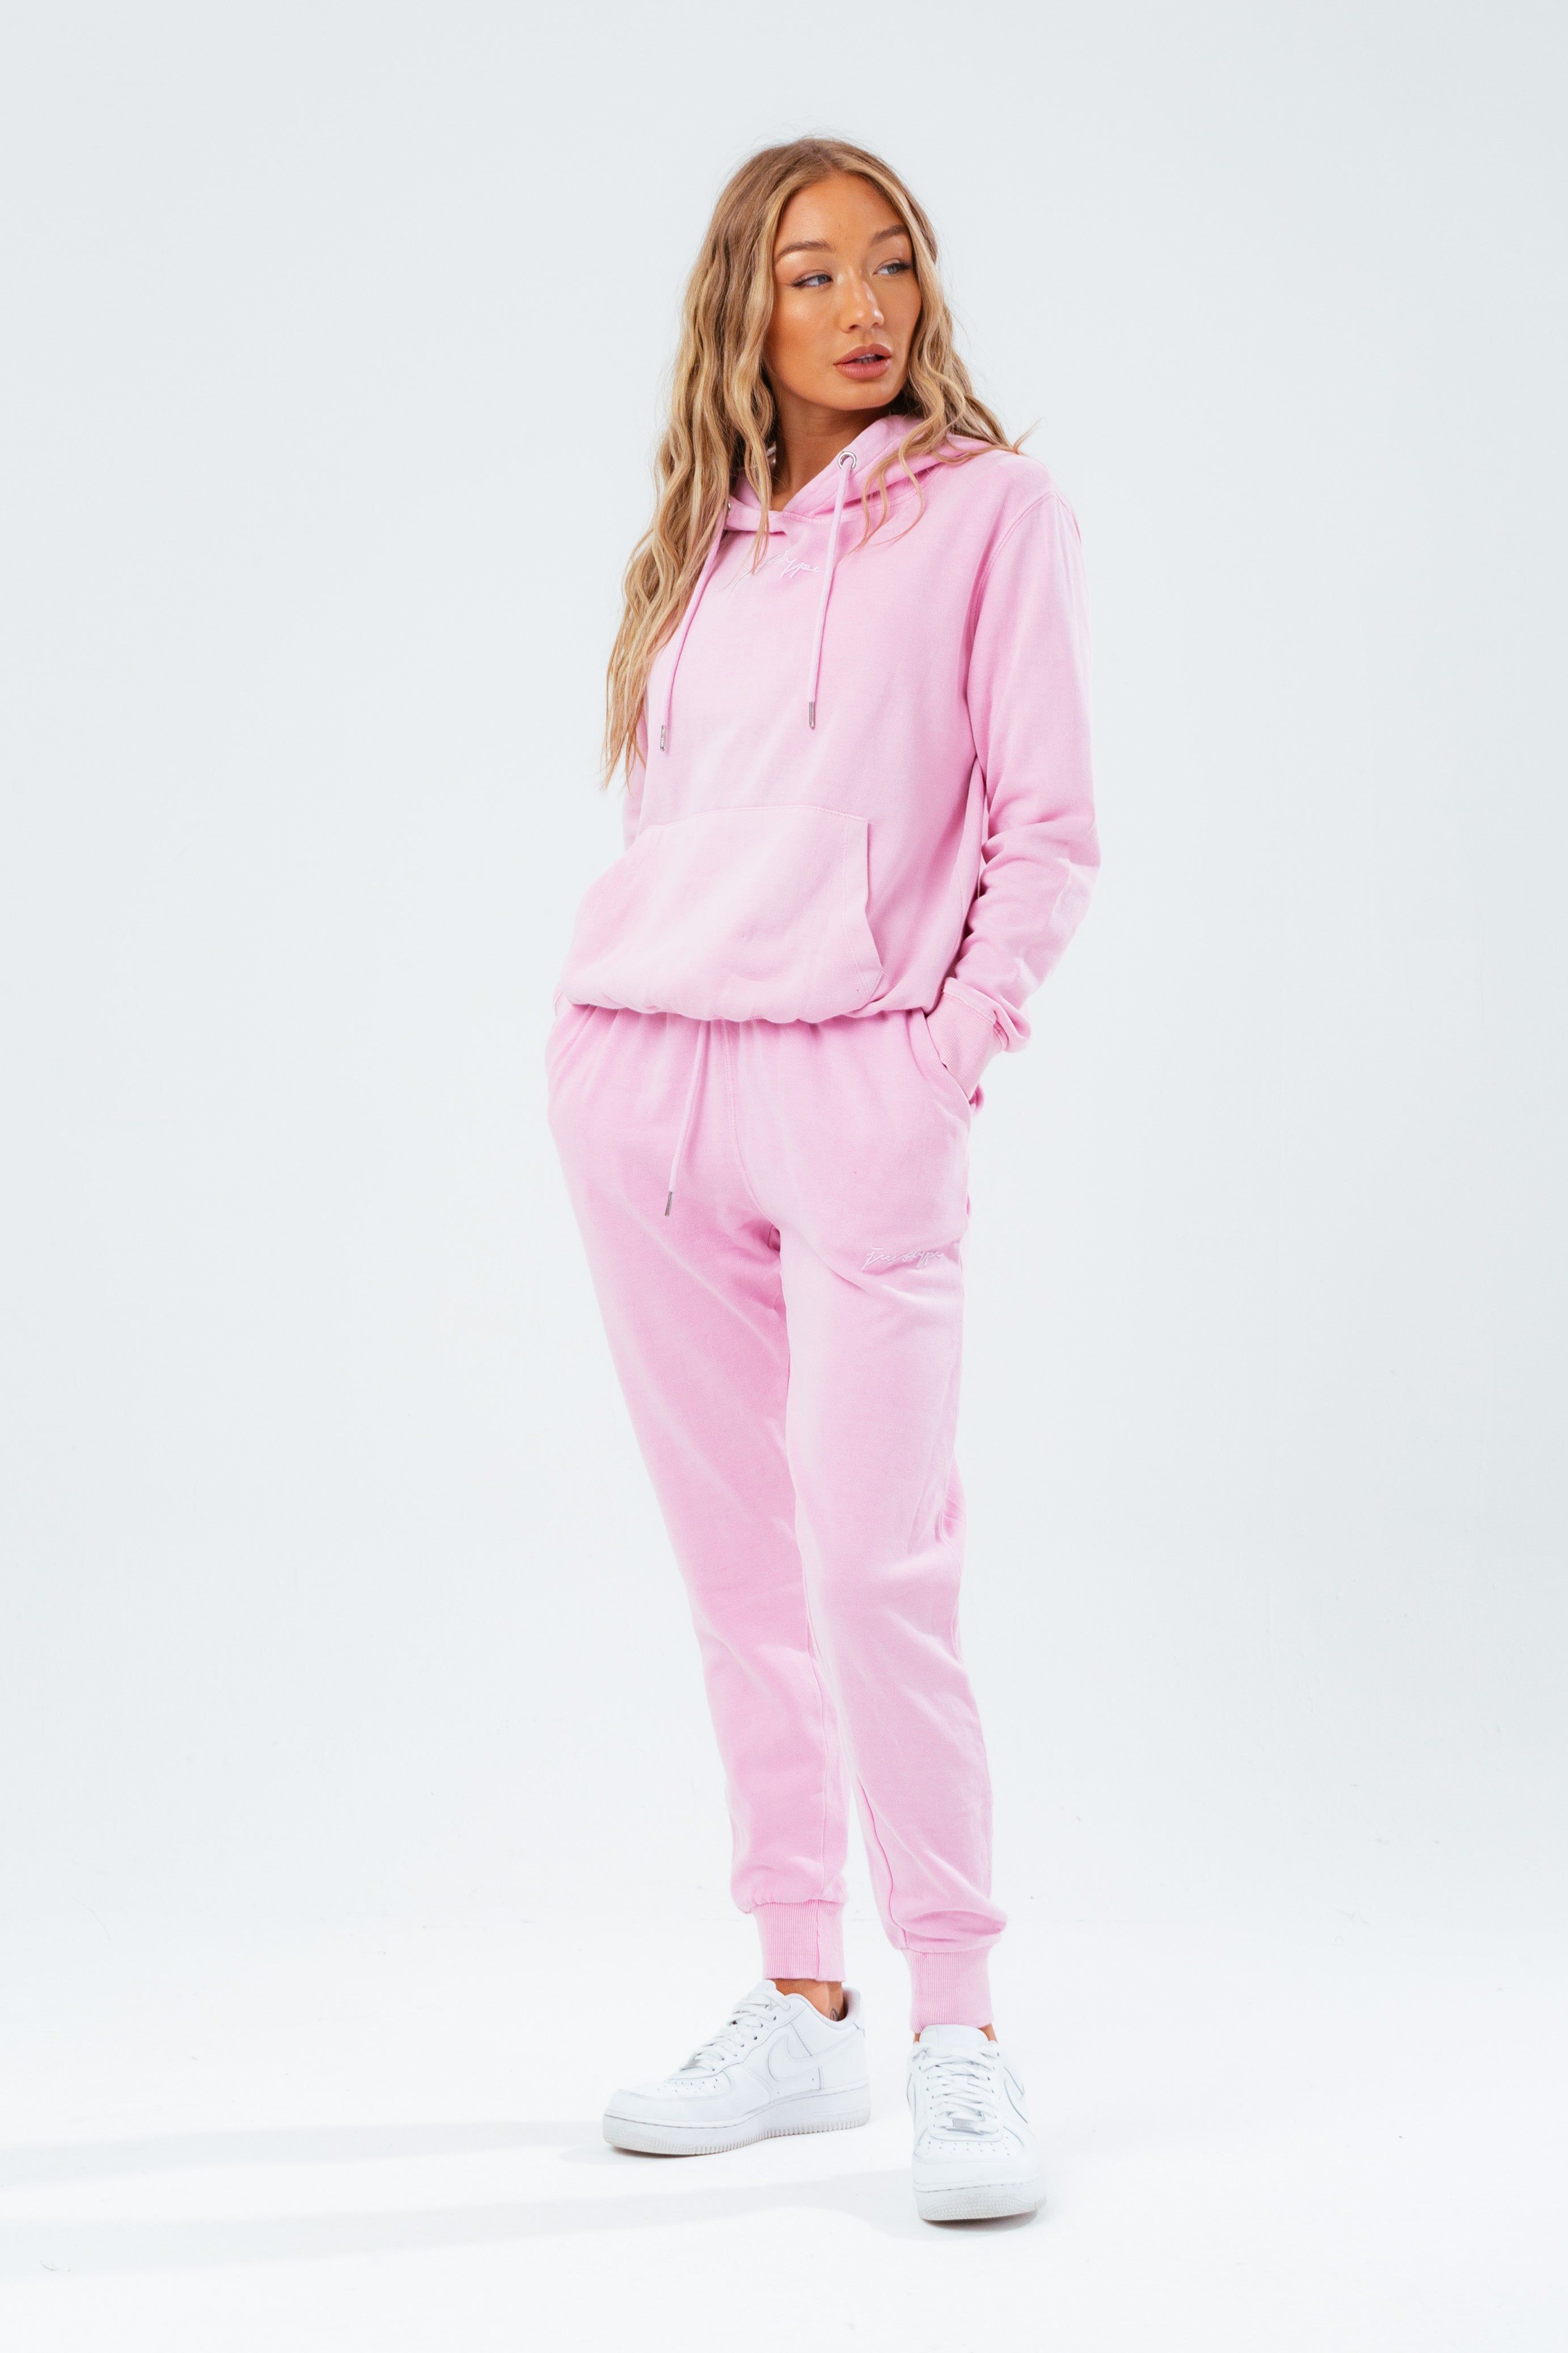 Stay on trend with the Hype Washed Baby Pink Scribble Logo Women's Joggers and grab the matching hoodie to complete the set. Designed in a soft-touch 70% Cotton 30% Polyester fabric base with the supreme amount of comfort you need from your new joggers. The design boasts an acid wash or tie-dye wash finish with an elasticated waistband, drawstring pullers and fitted cuffs. Machine wash at 30 degrees.